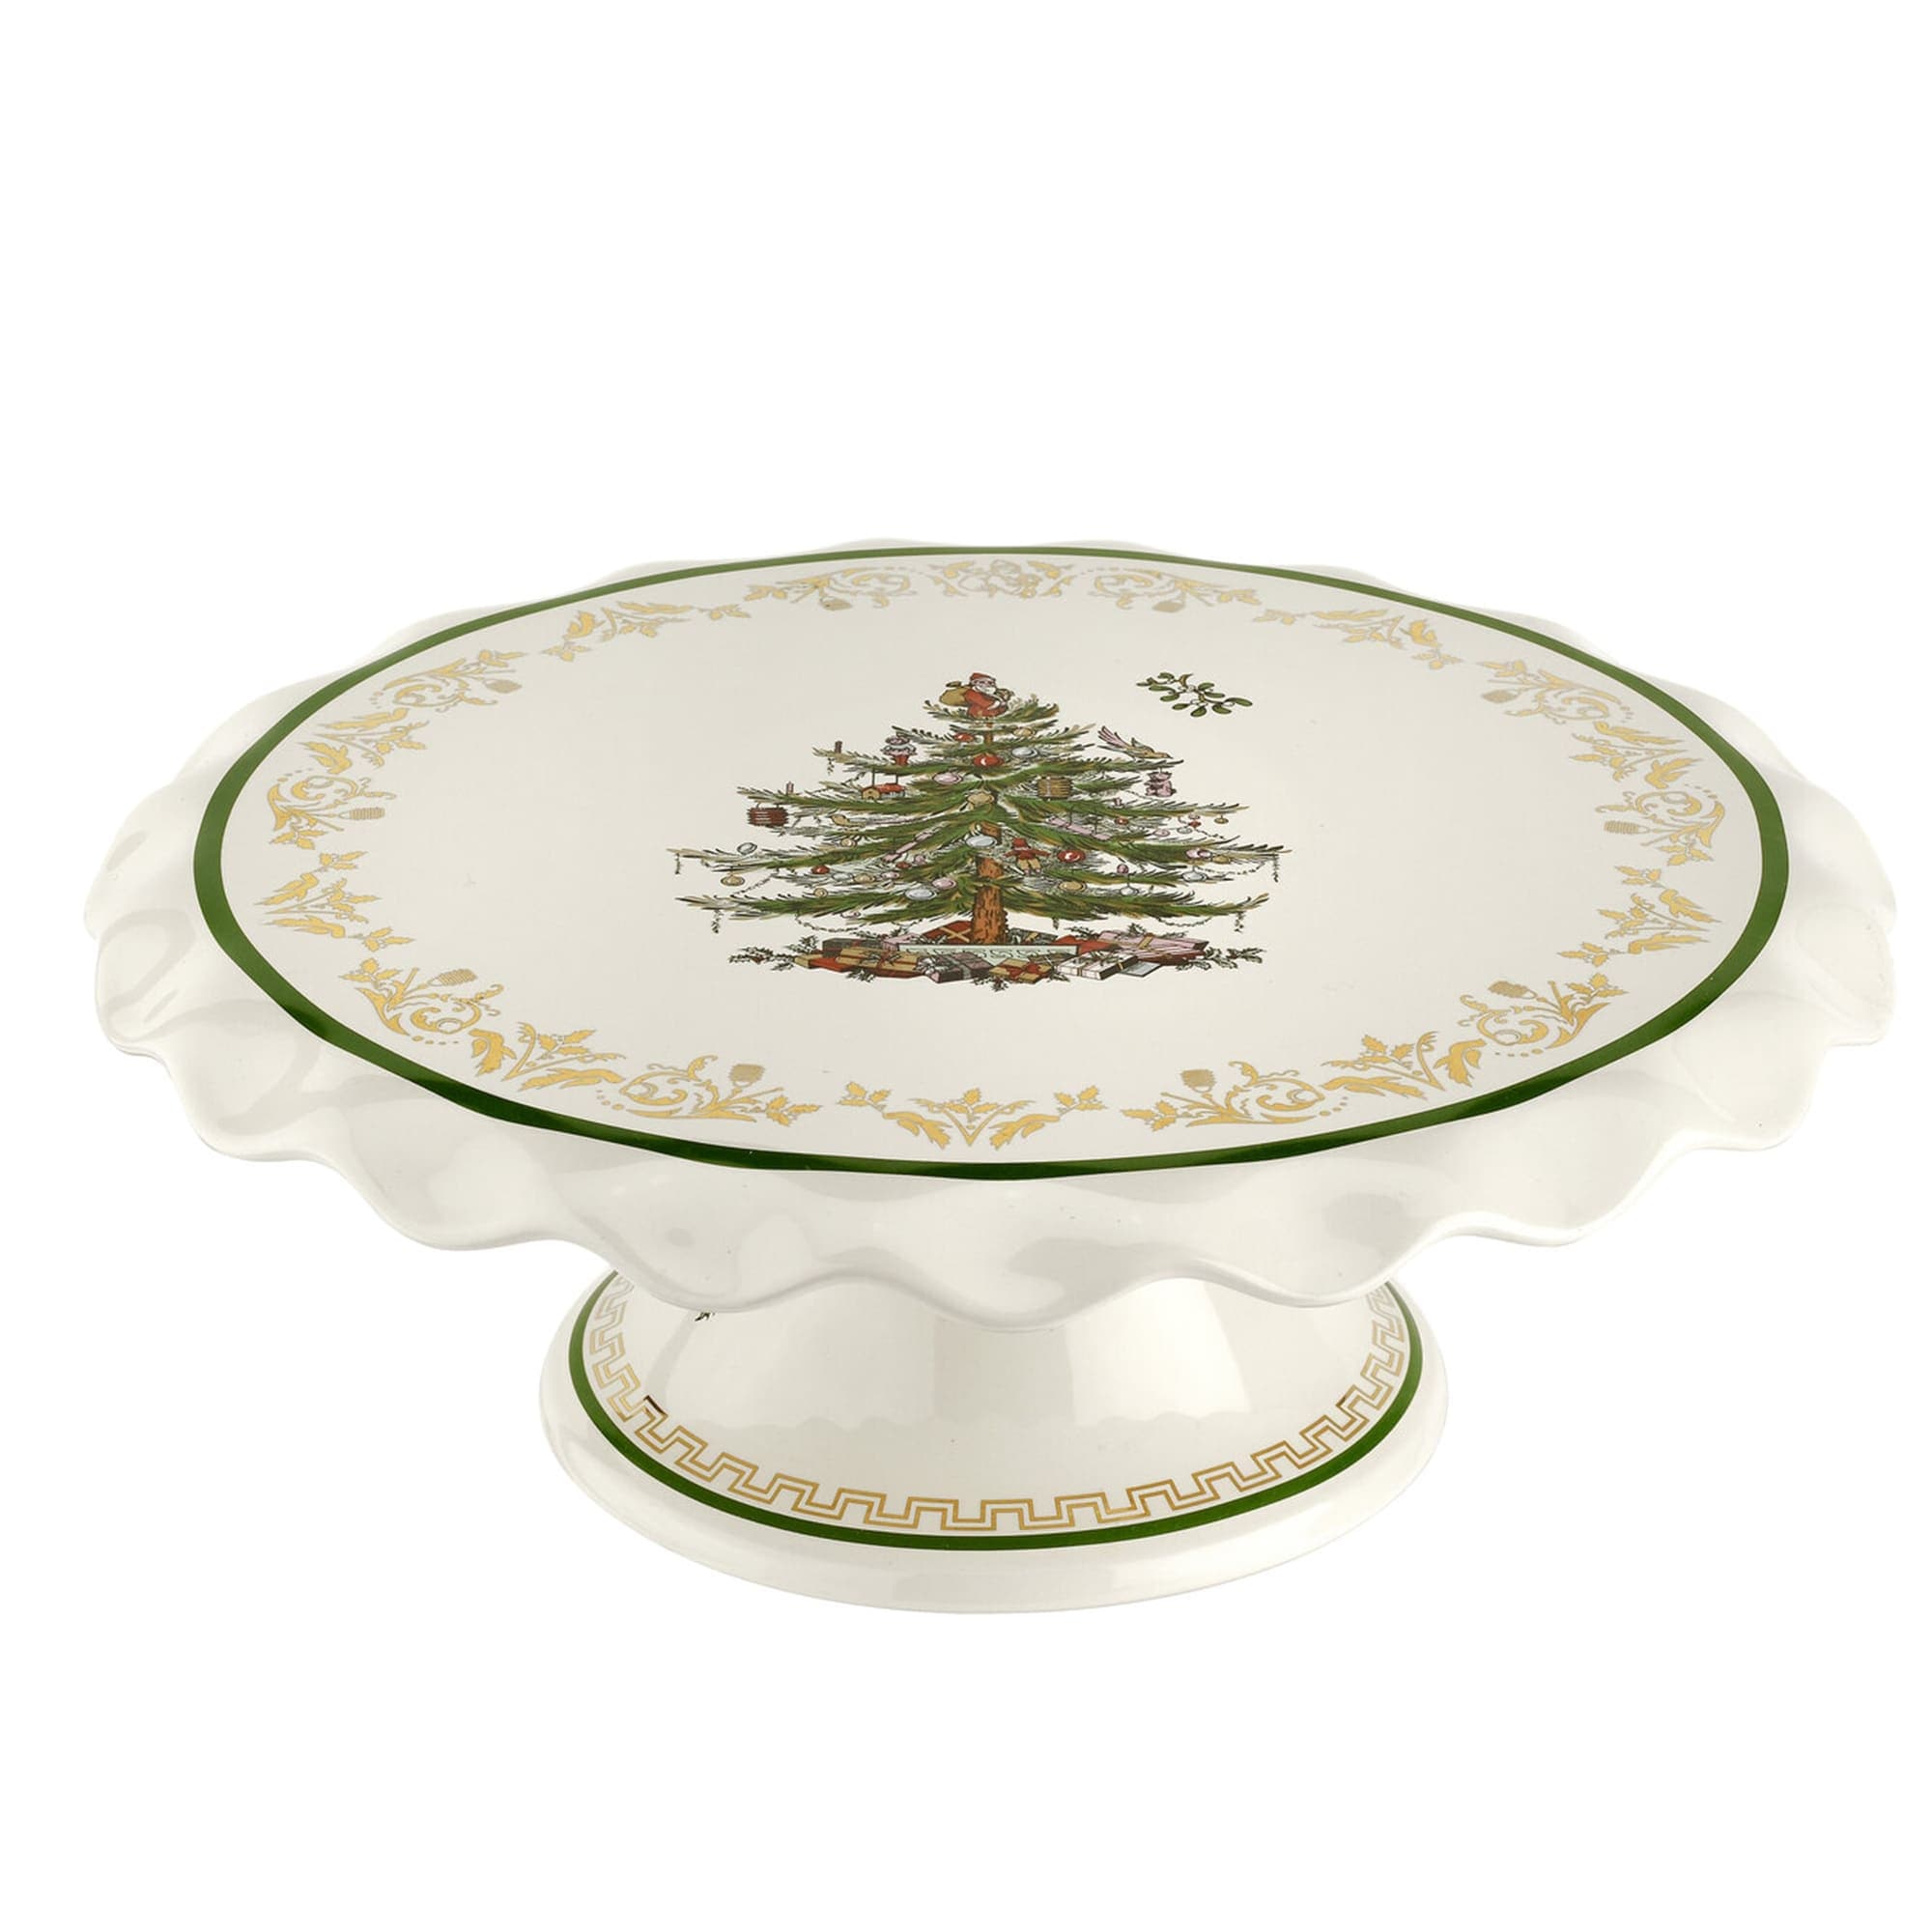 https://ak1.ostkcdn.com/images/products/is/images/direct/c23d8dc0eb76c099b03380446a91b375de41b9a4/Spode-Christmas-Tree-Gold-Cake-Stand.jpg